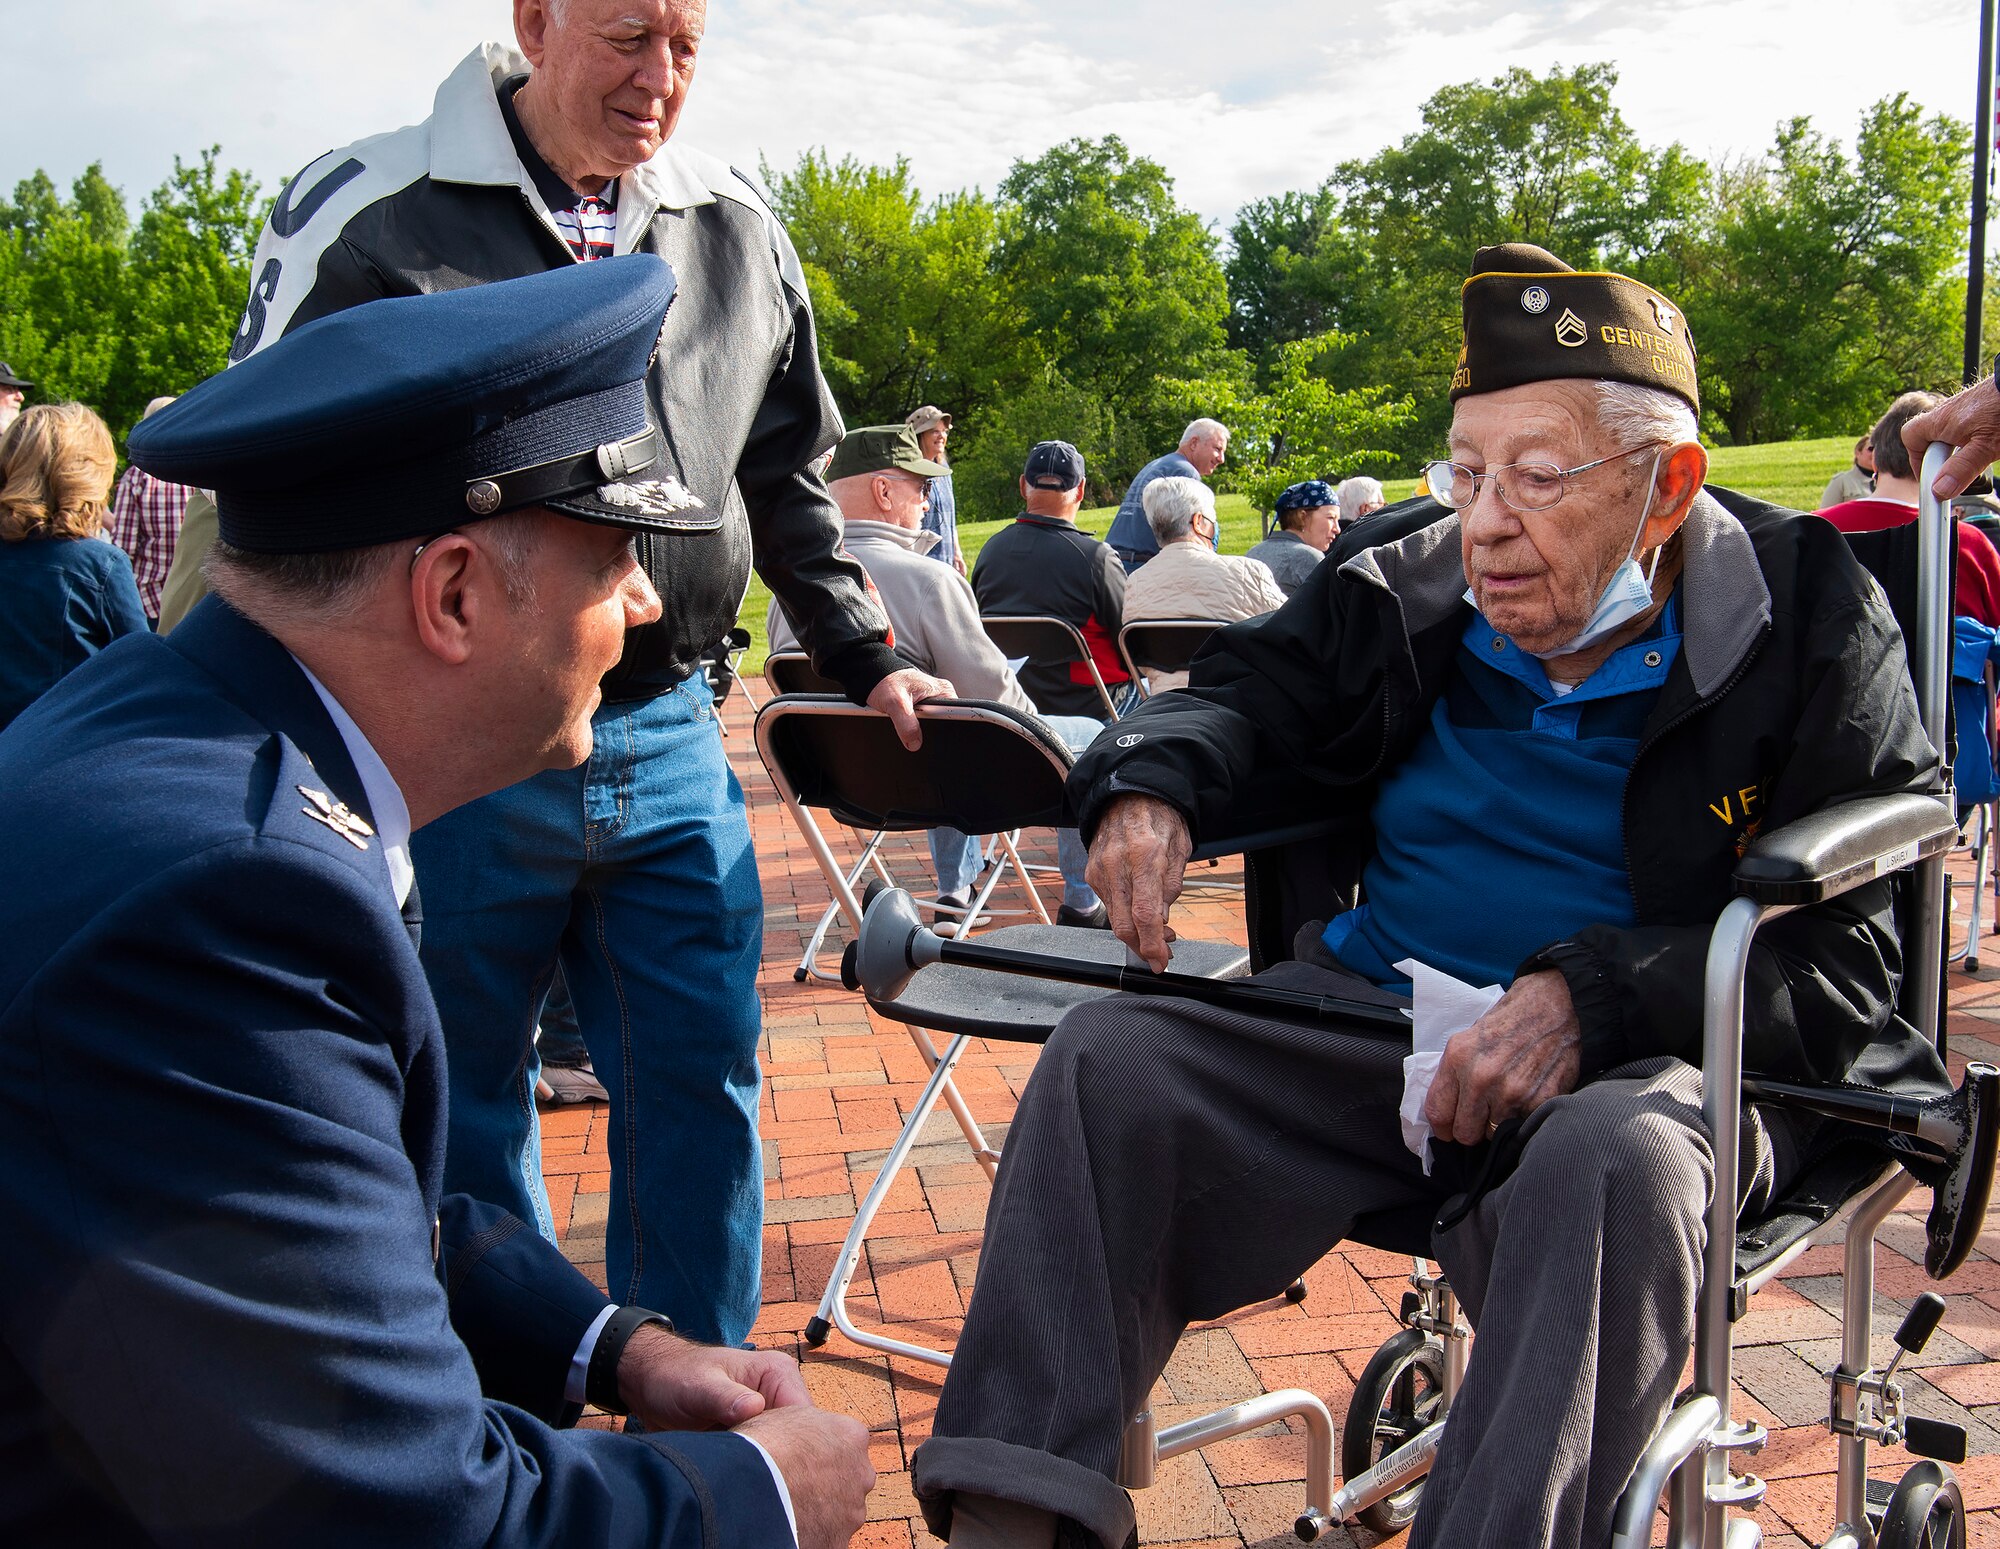 U.S. Air Force Col. Michael Phillips, 88th Air Base Wing vice commander, visits with Ken Snavely, a 103-year-old veteran who served with the 8th Air Force in World War II, prior to the Centerville, Ohio, Memorial Day ceremony May 31, 2021. Phillips was the event’s keynote speaker. (U.S. Air Force photo by R.J. Oriez)